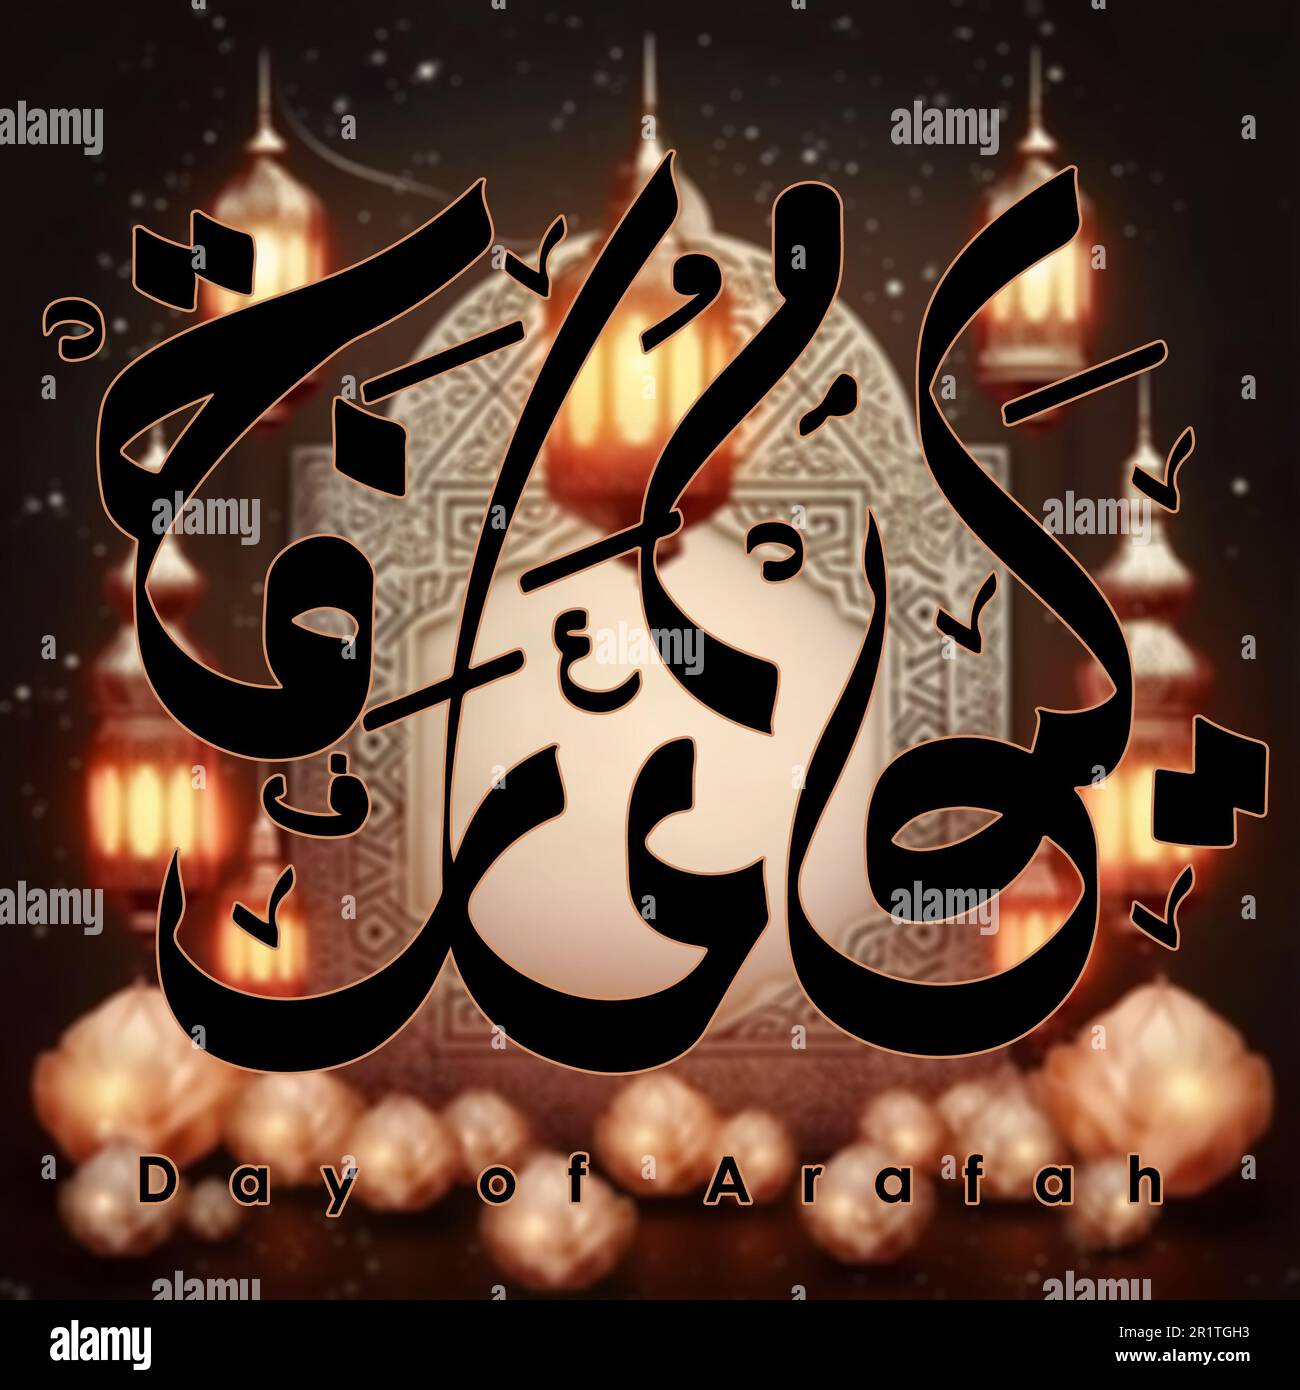 Arafat Day in calligraphy mean The day of Arafah with beautiful lantern decoration. Islamic charity design. Stock Photo